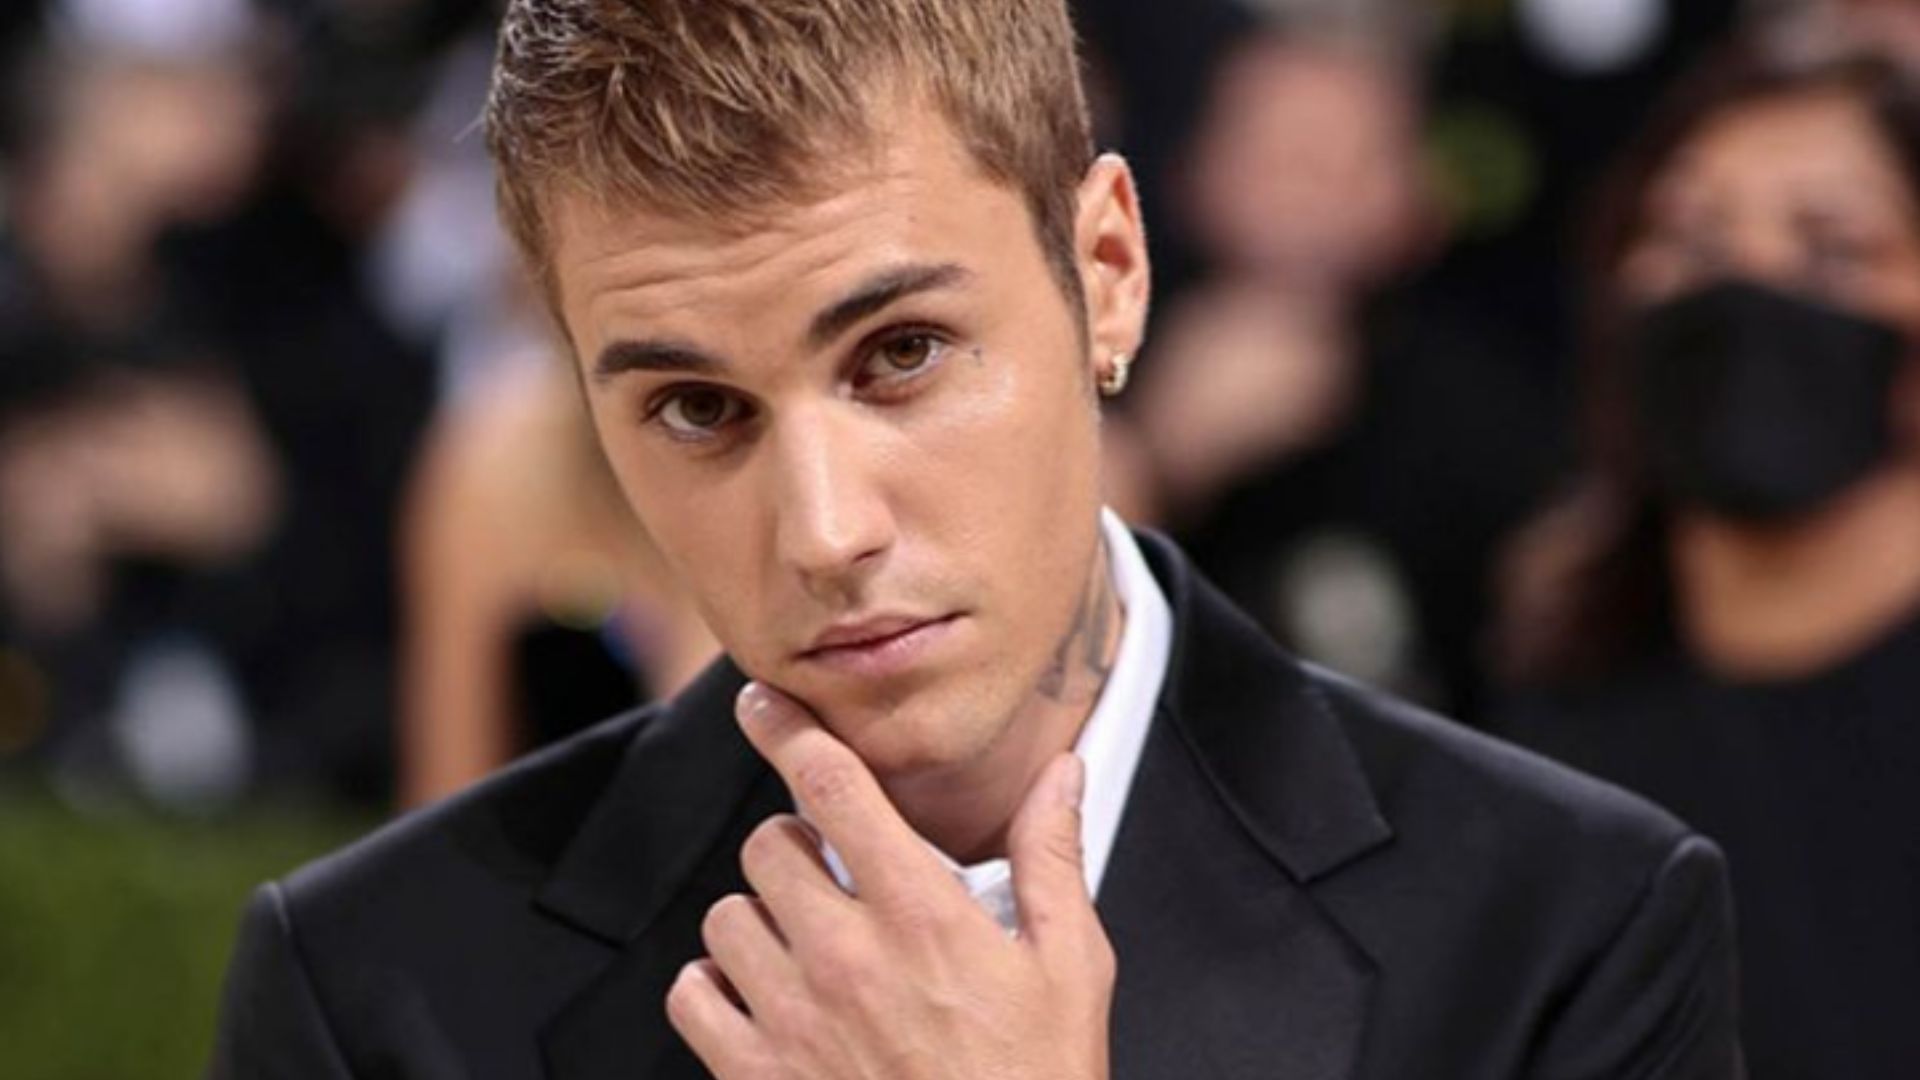 Justin Bieber to continue world visit after Syndrome conclusion